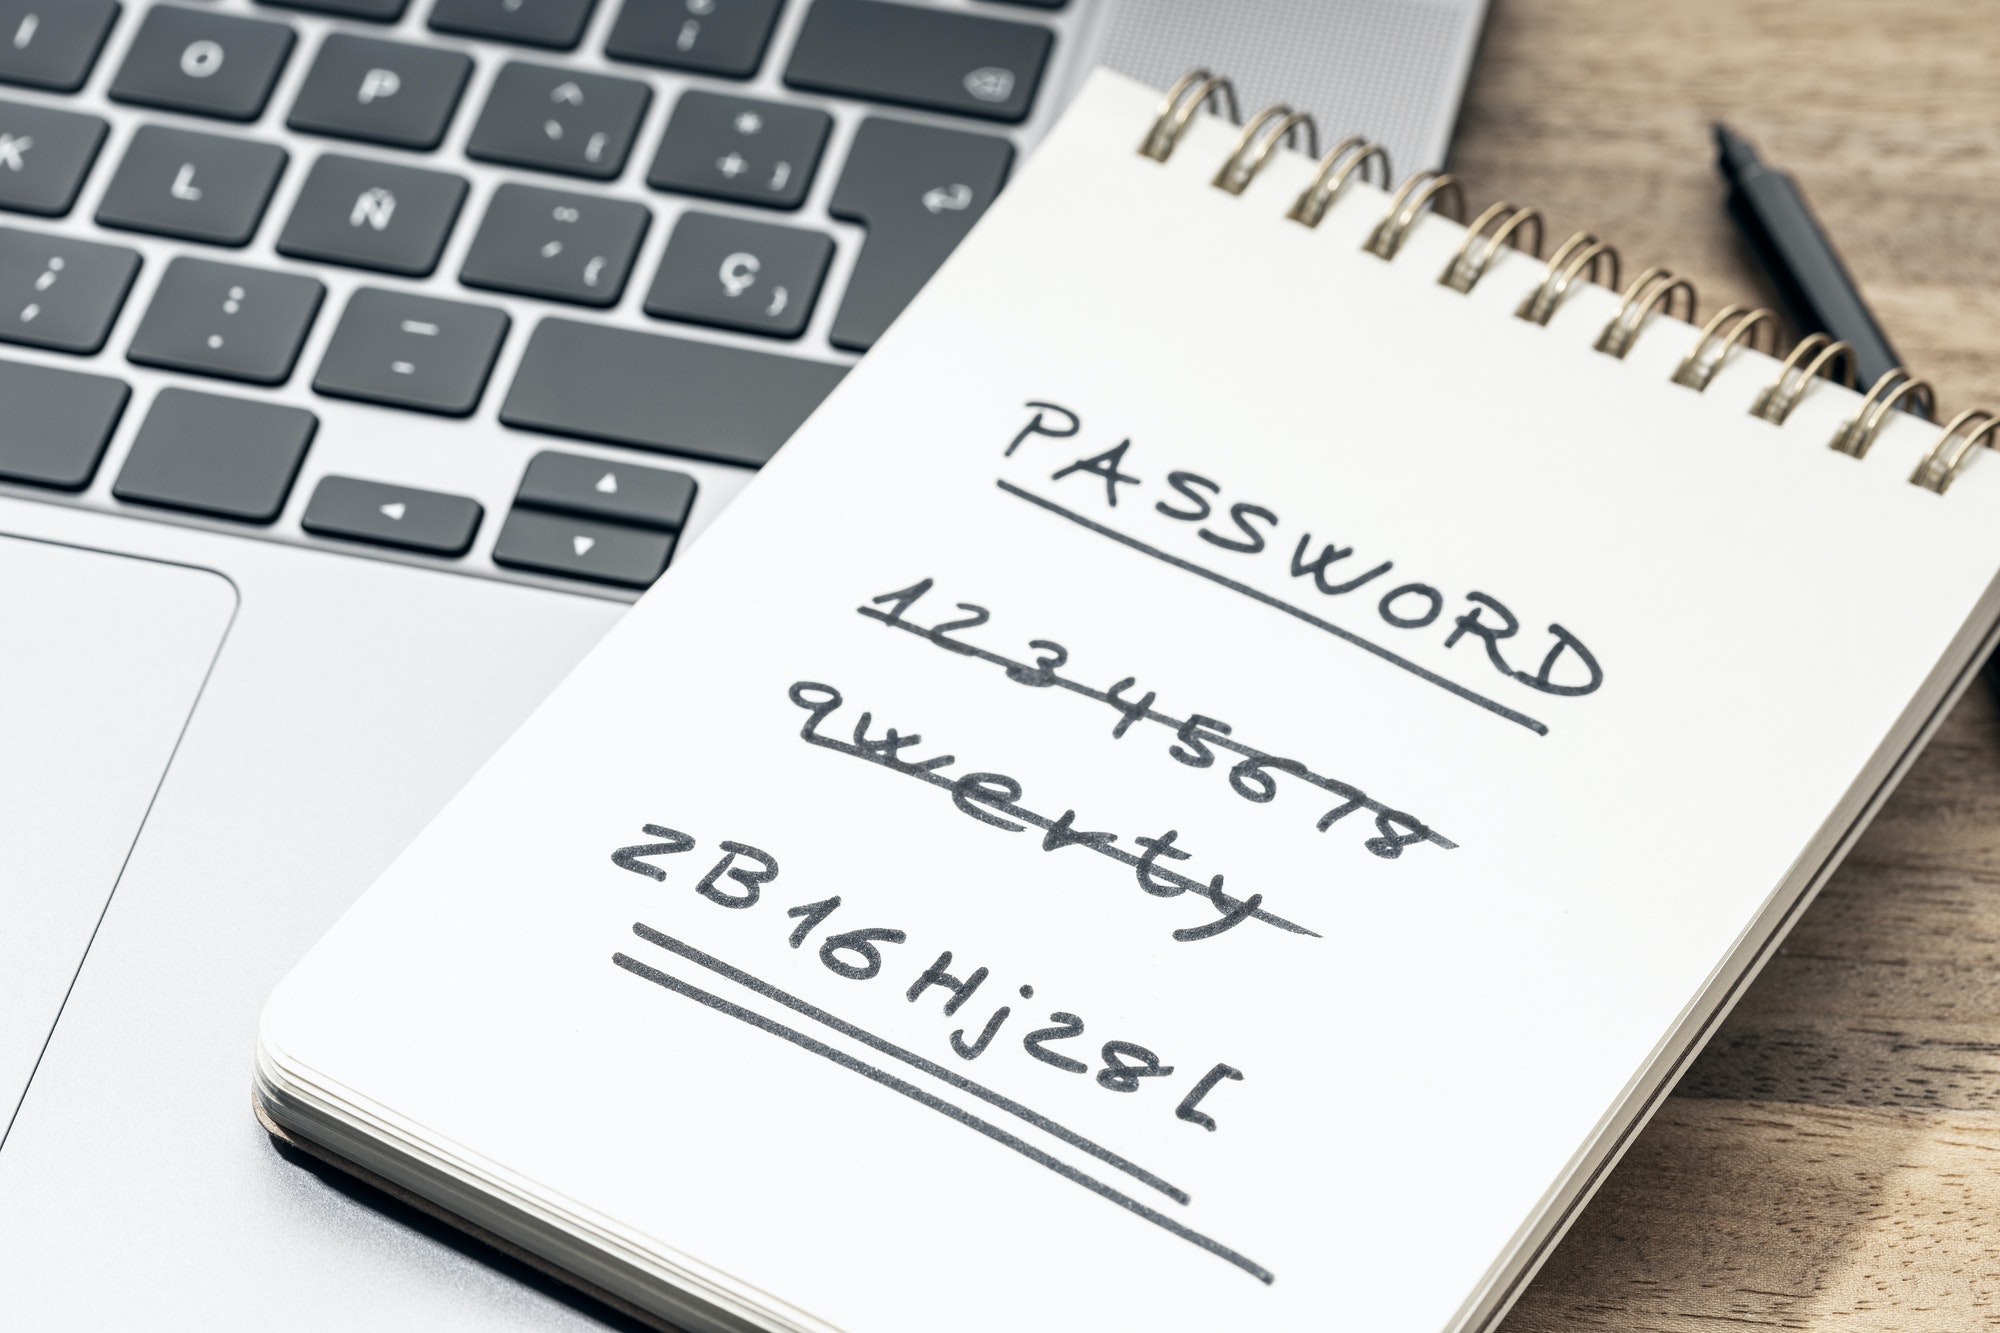 Strong and weak easy Password concept